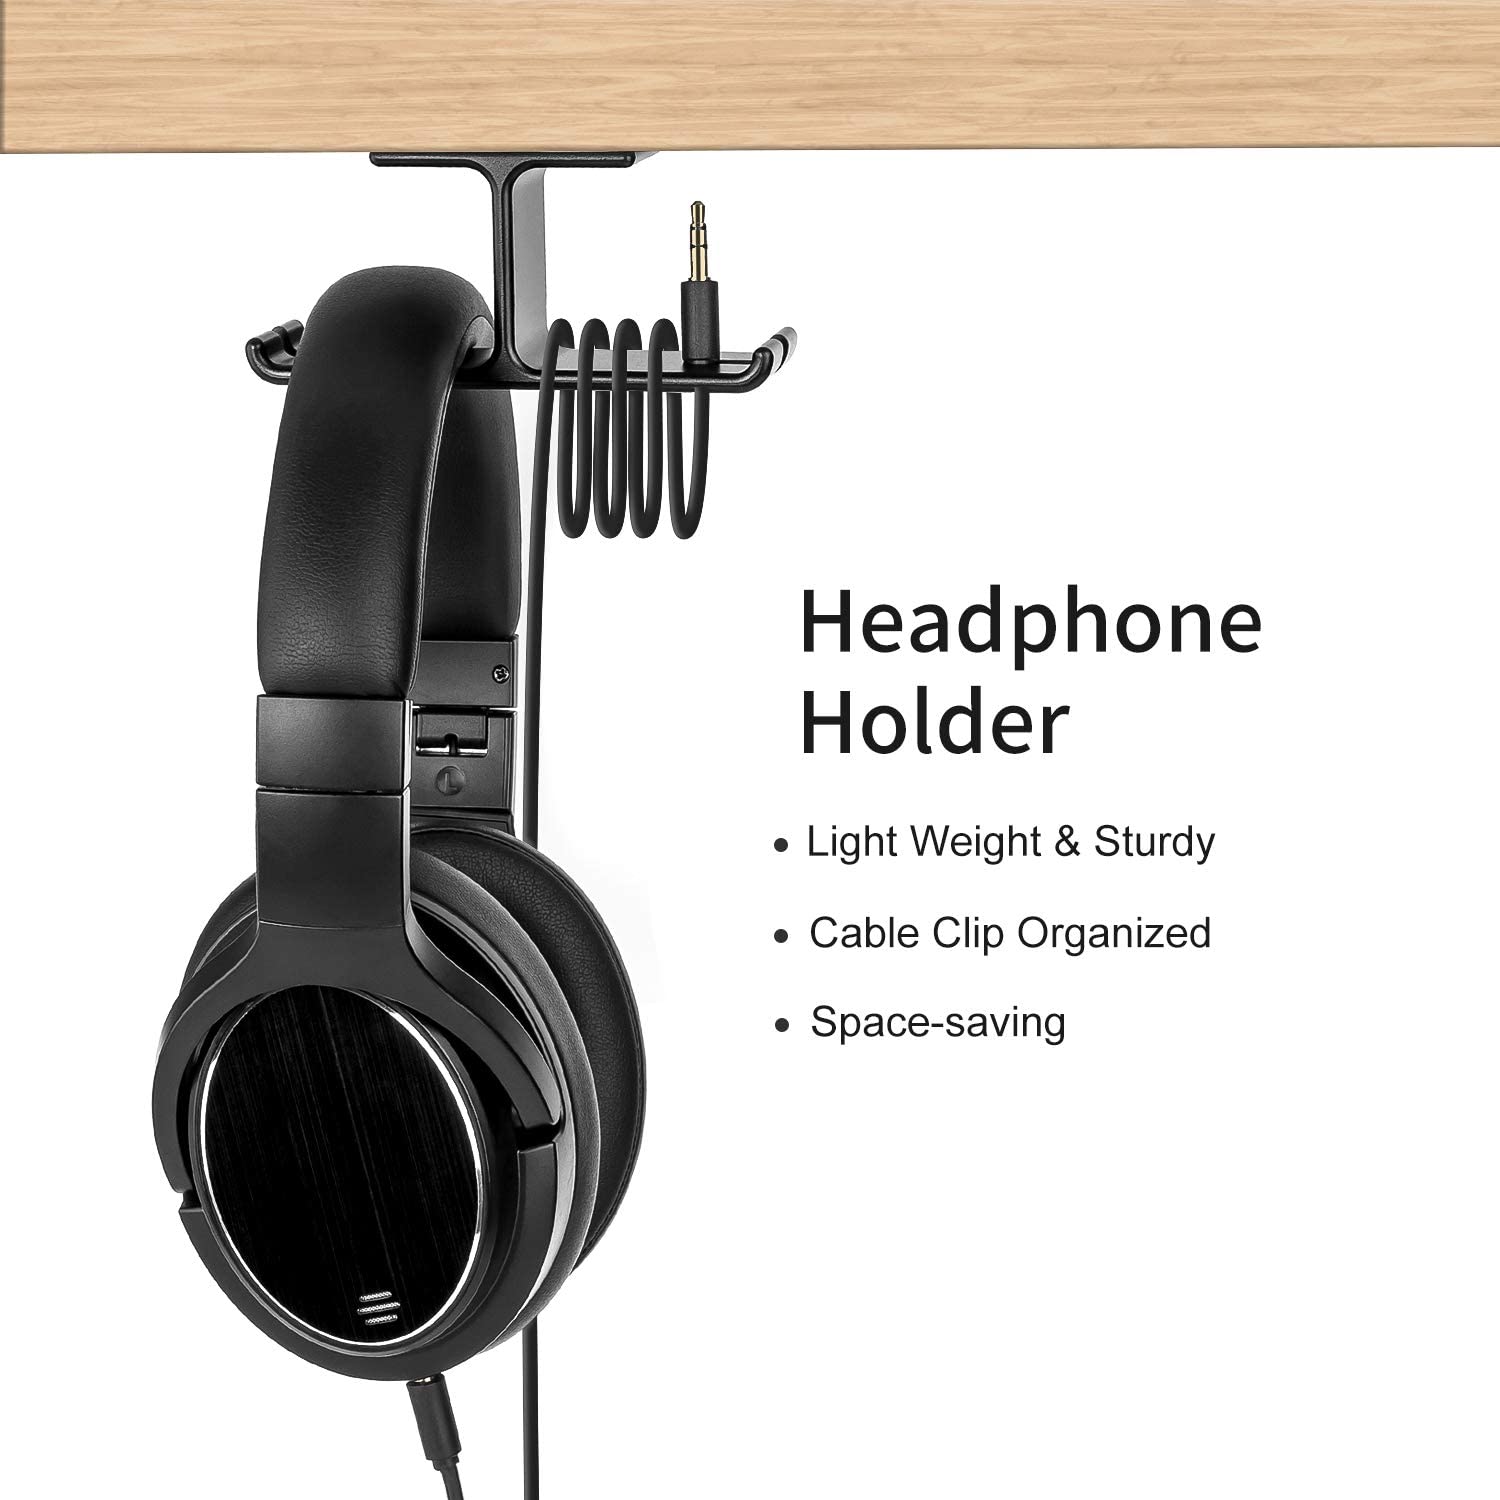 Dual Headphone Hanger Headset Stand New Bee Under Desk Aluminum Headphone Hook Mount with Cable Organizer for All Headphones